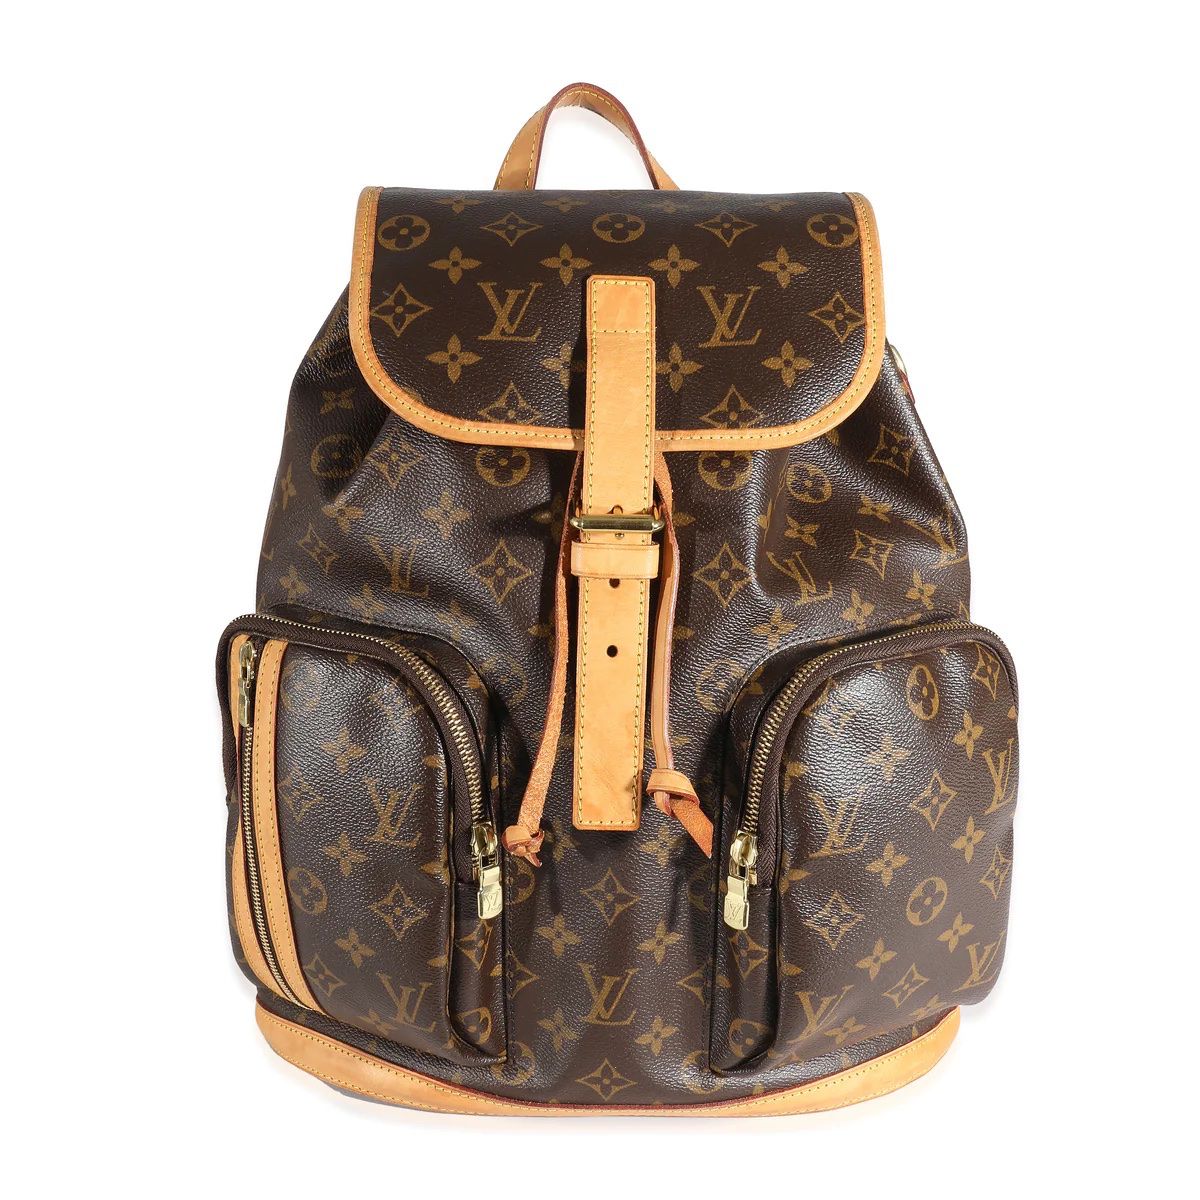 Louis Vuitton Backpack (Price reduced)